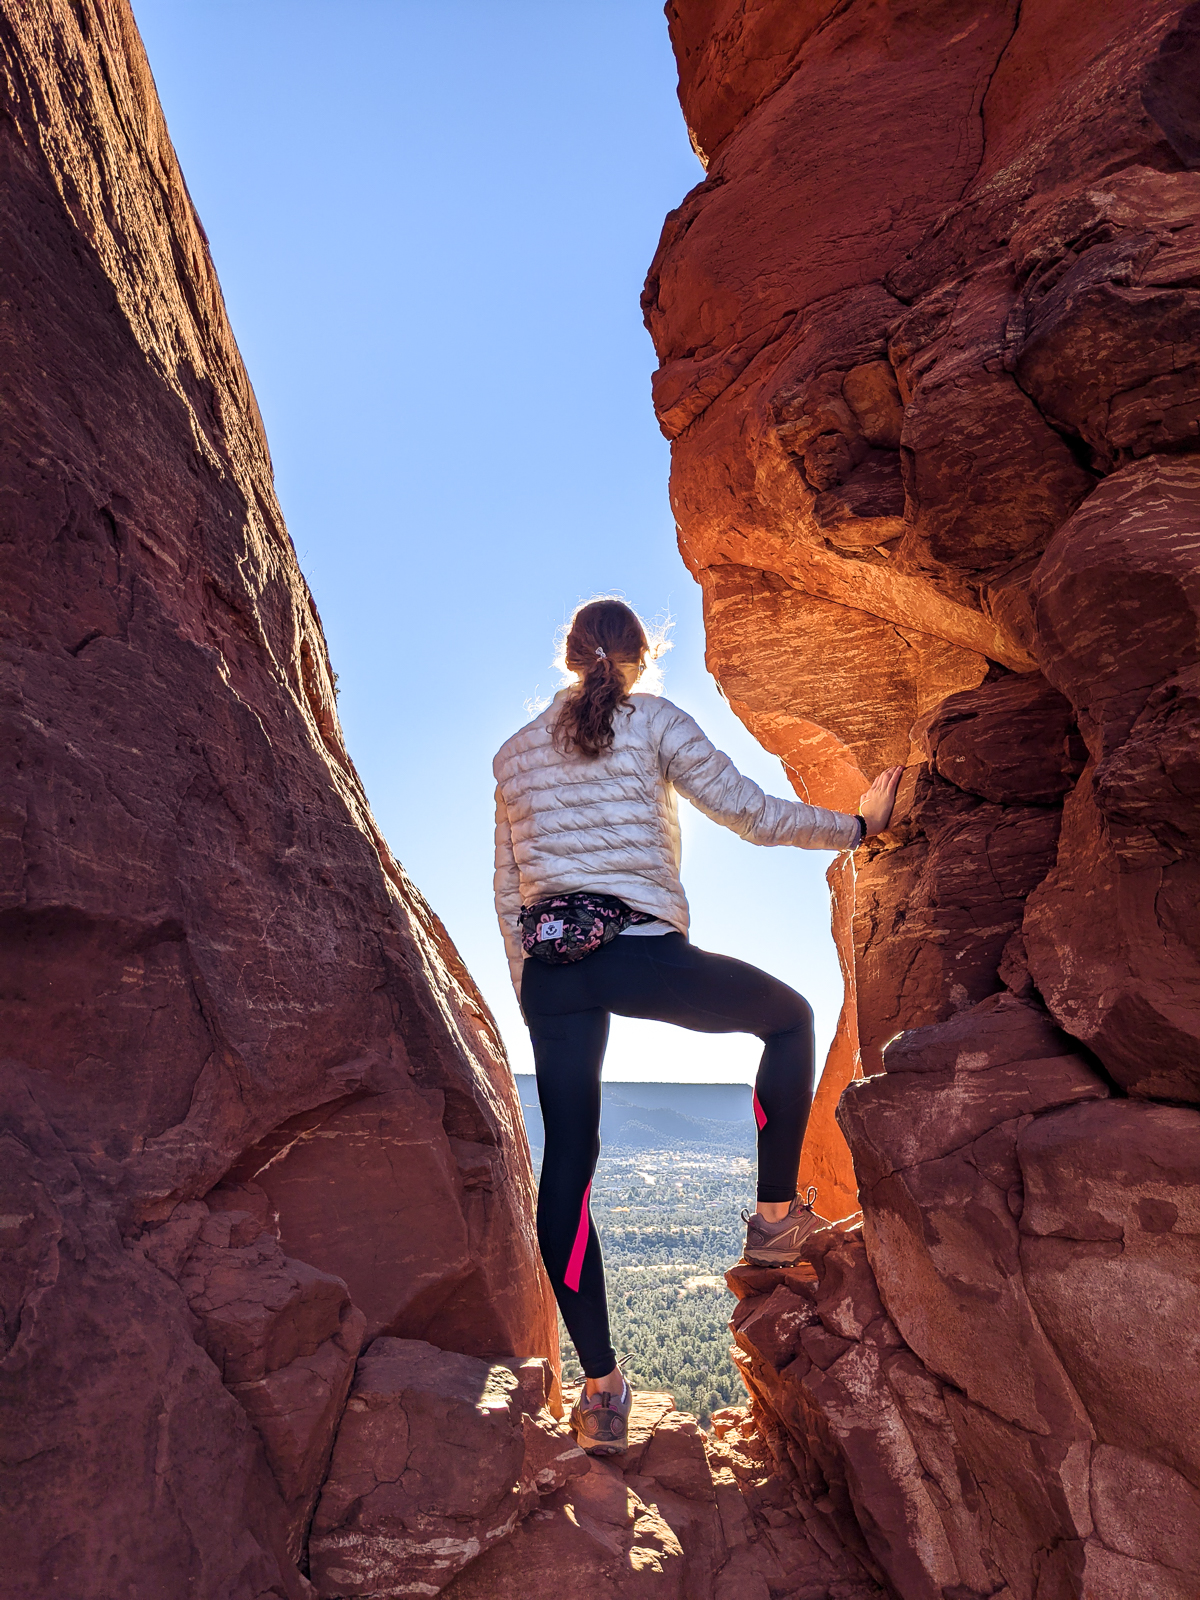 6 Iconic & Secret Sedona Vortex Hikes For All Levels bell rock